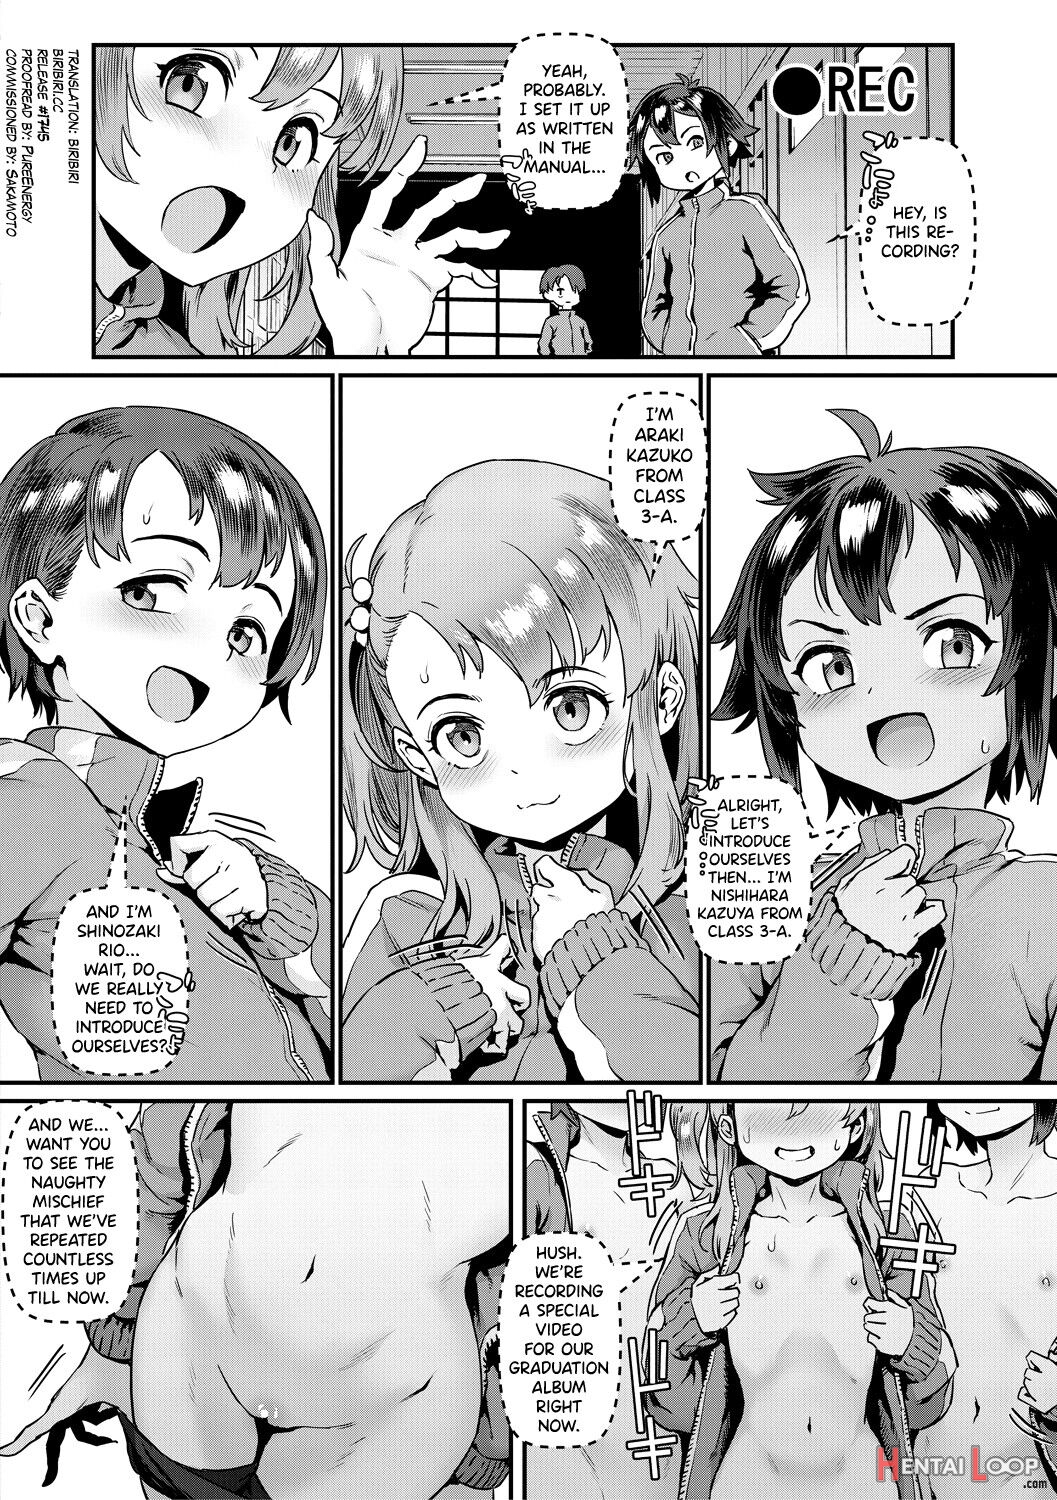 Let's Learn With Orgy / Rankou De Wakarou! page 152